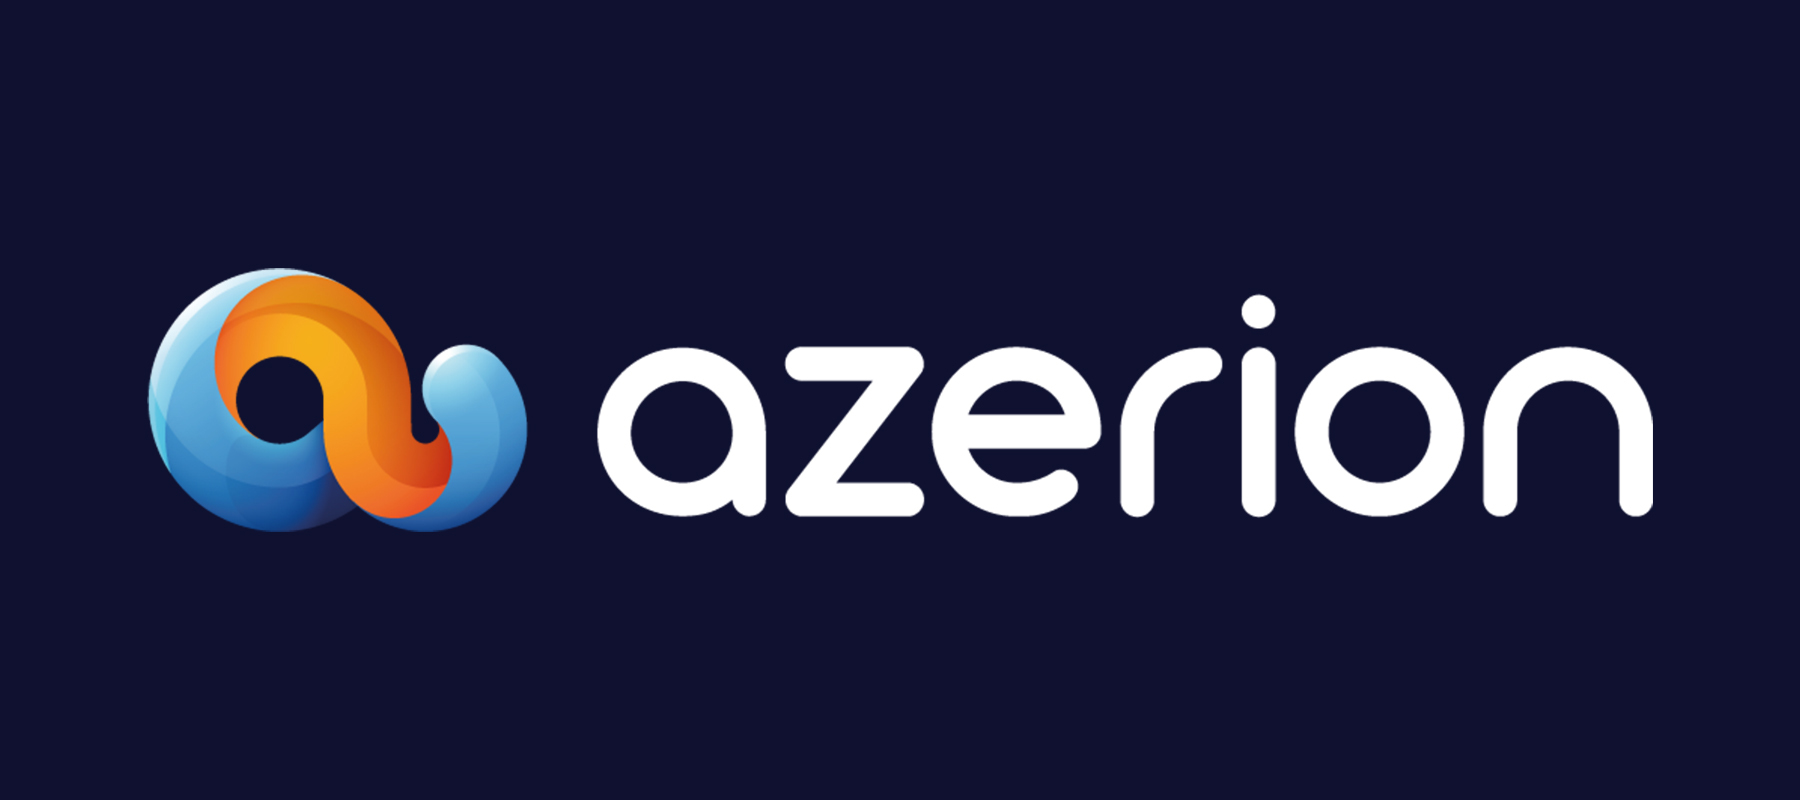 [Vacancy] Azerion has a position for a Senior Back-End PHP Developer